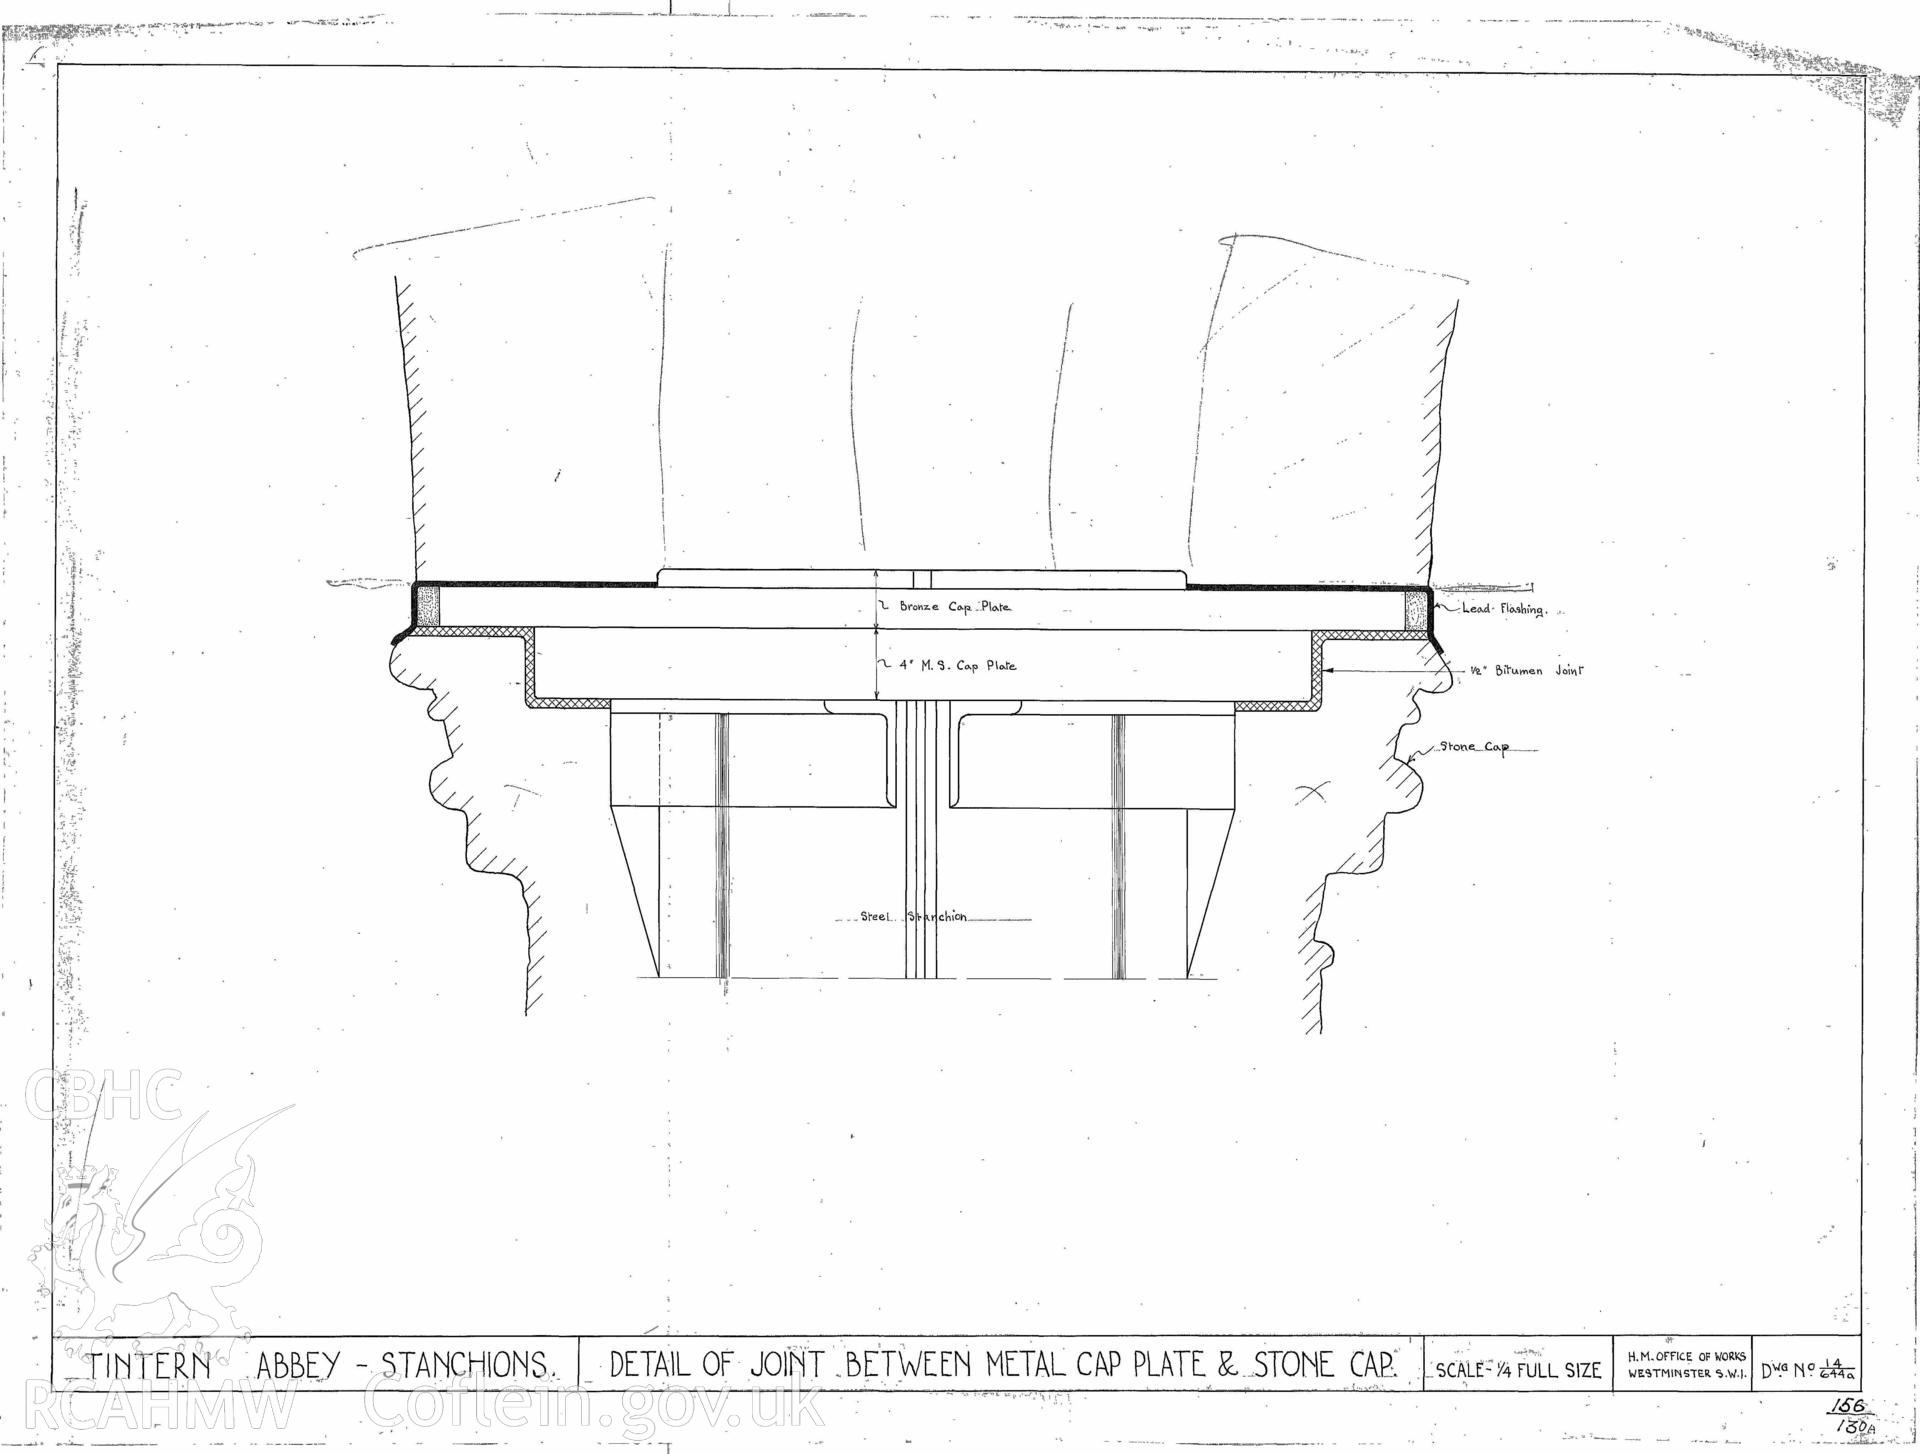 Cadw guardianship monument drawing of Tintern Abbey. Details of joints between metal and stone caps. Cadw ref. No. 156/130A. Scale 1:48.